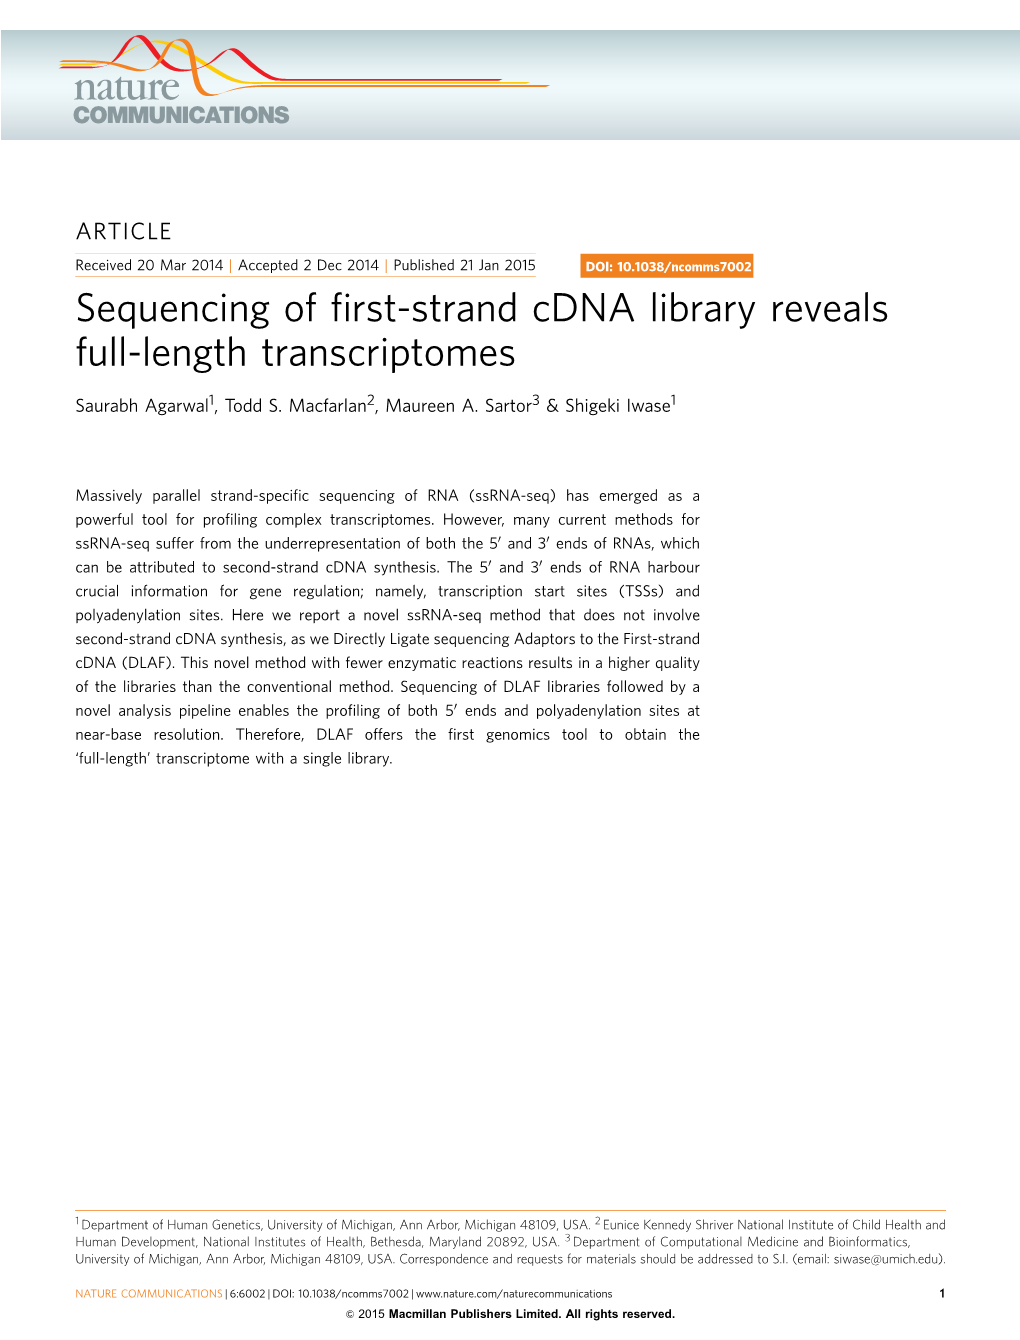 Sequencing of First-Strand Cdna Library Reveals Full-Length